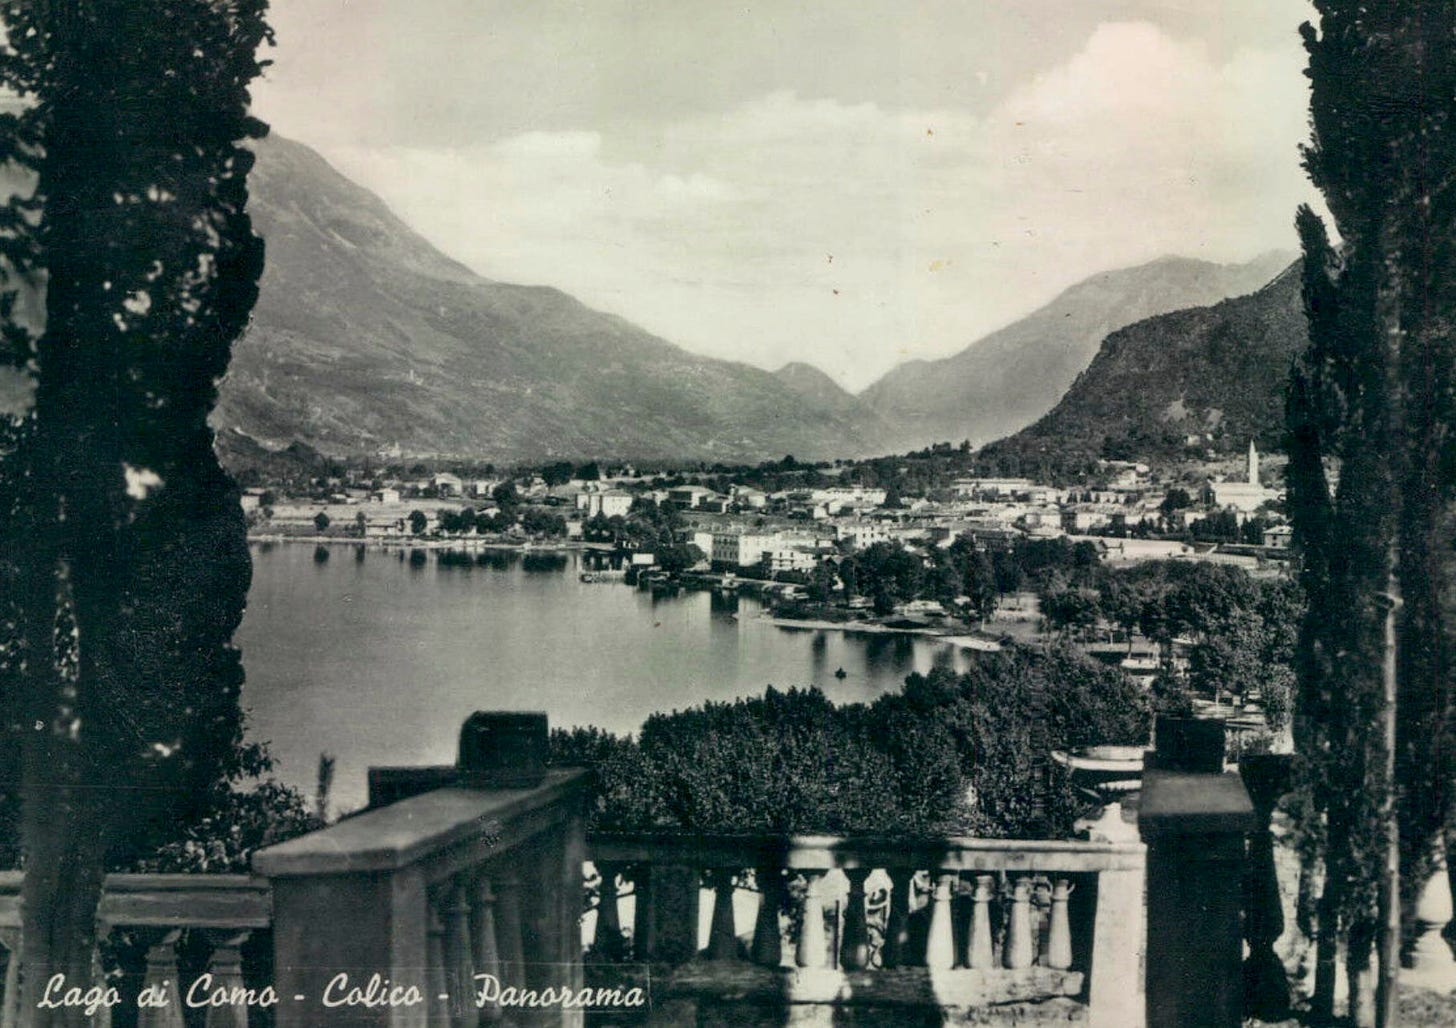 Panorama of the Lake of Como from Colico, postcard from the 1910s.